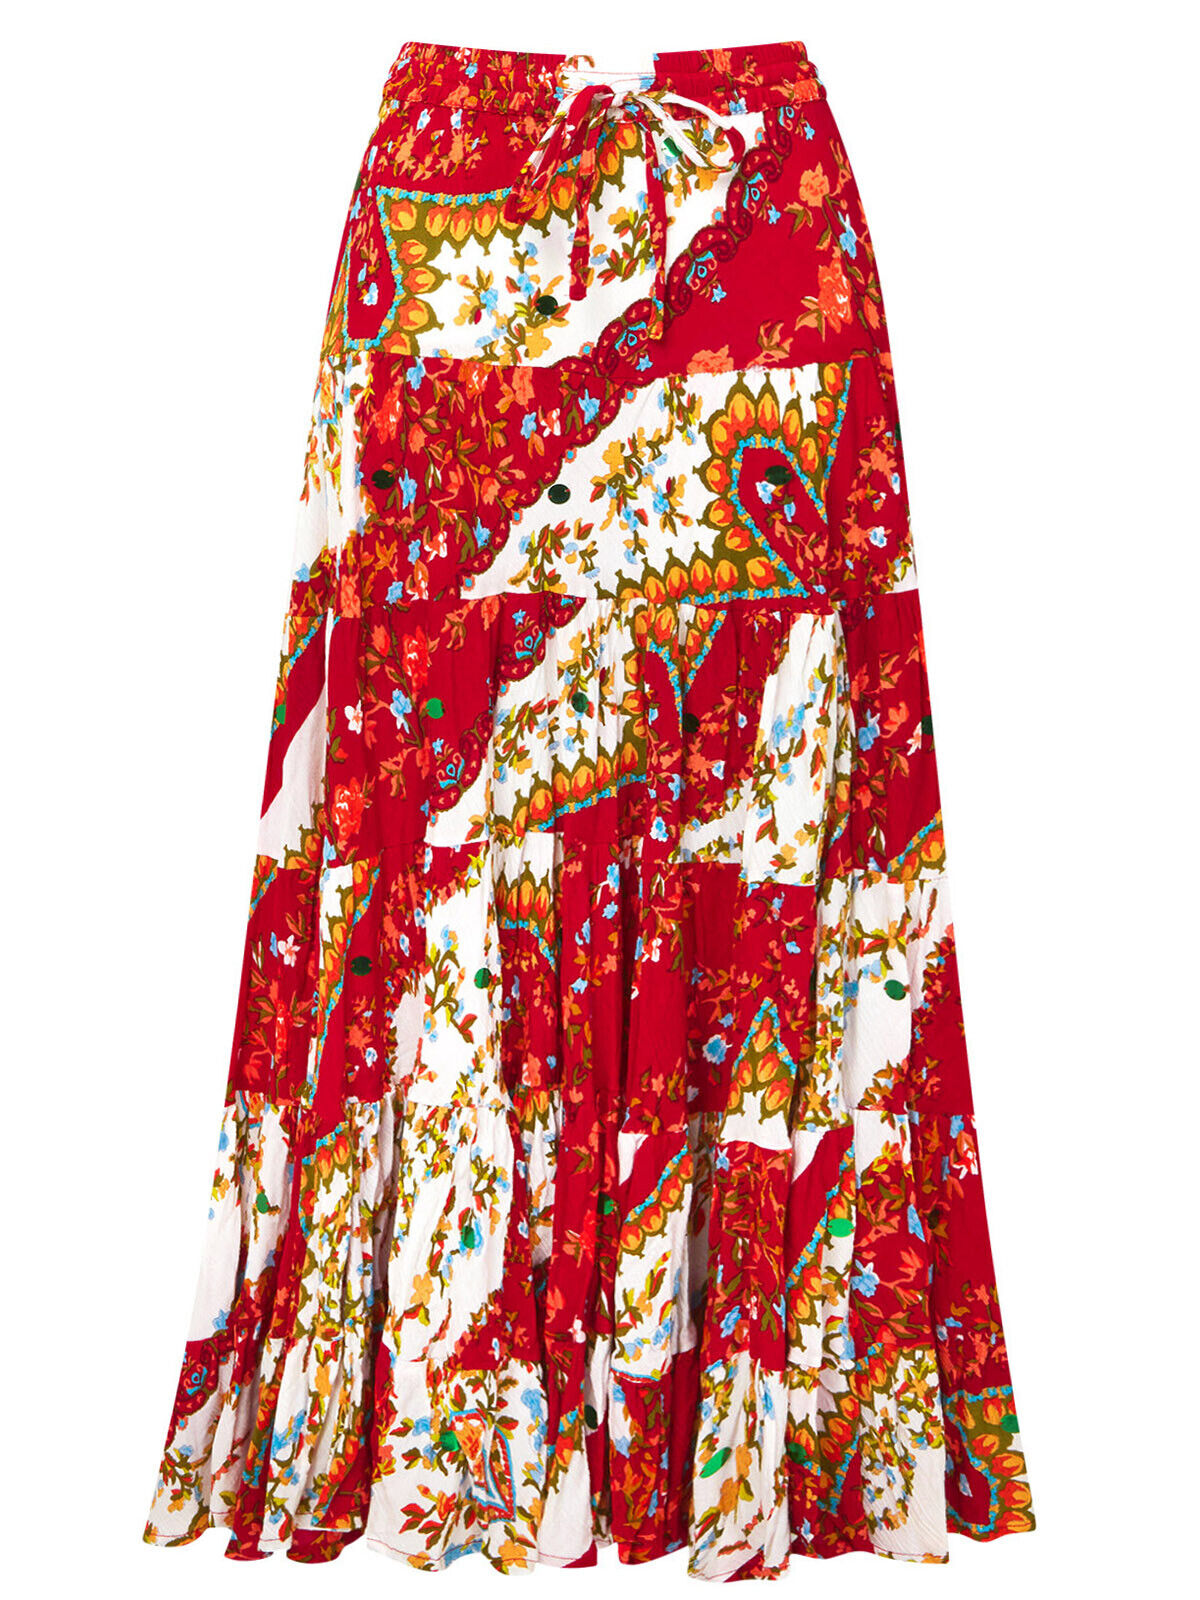 Joe Browns Red Boho Long Maxi Best Ever Tiered Skirt Sizes 10, 12, 14 RRP £55